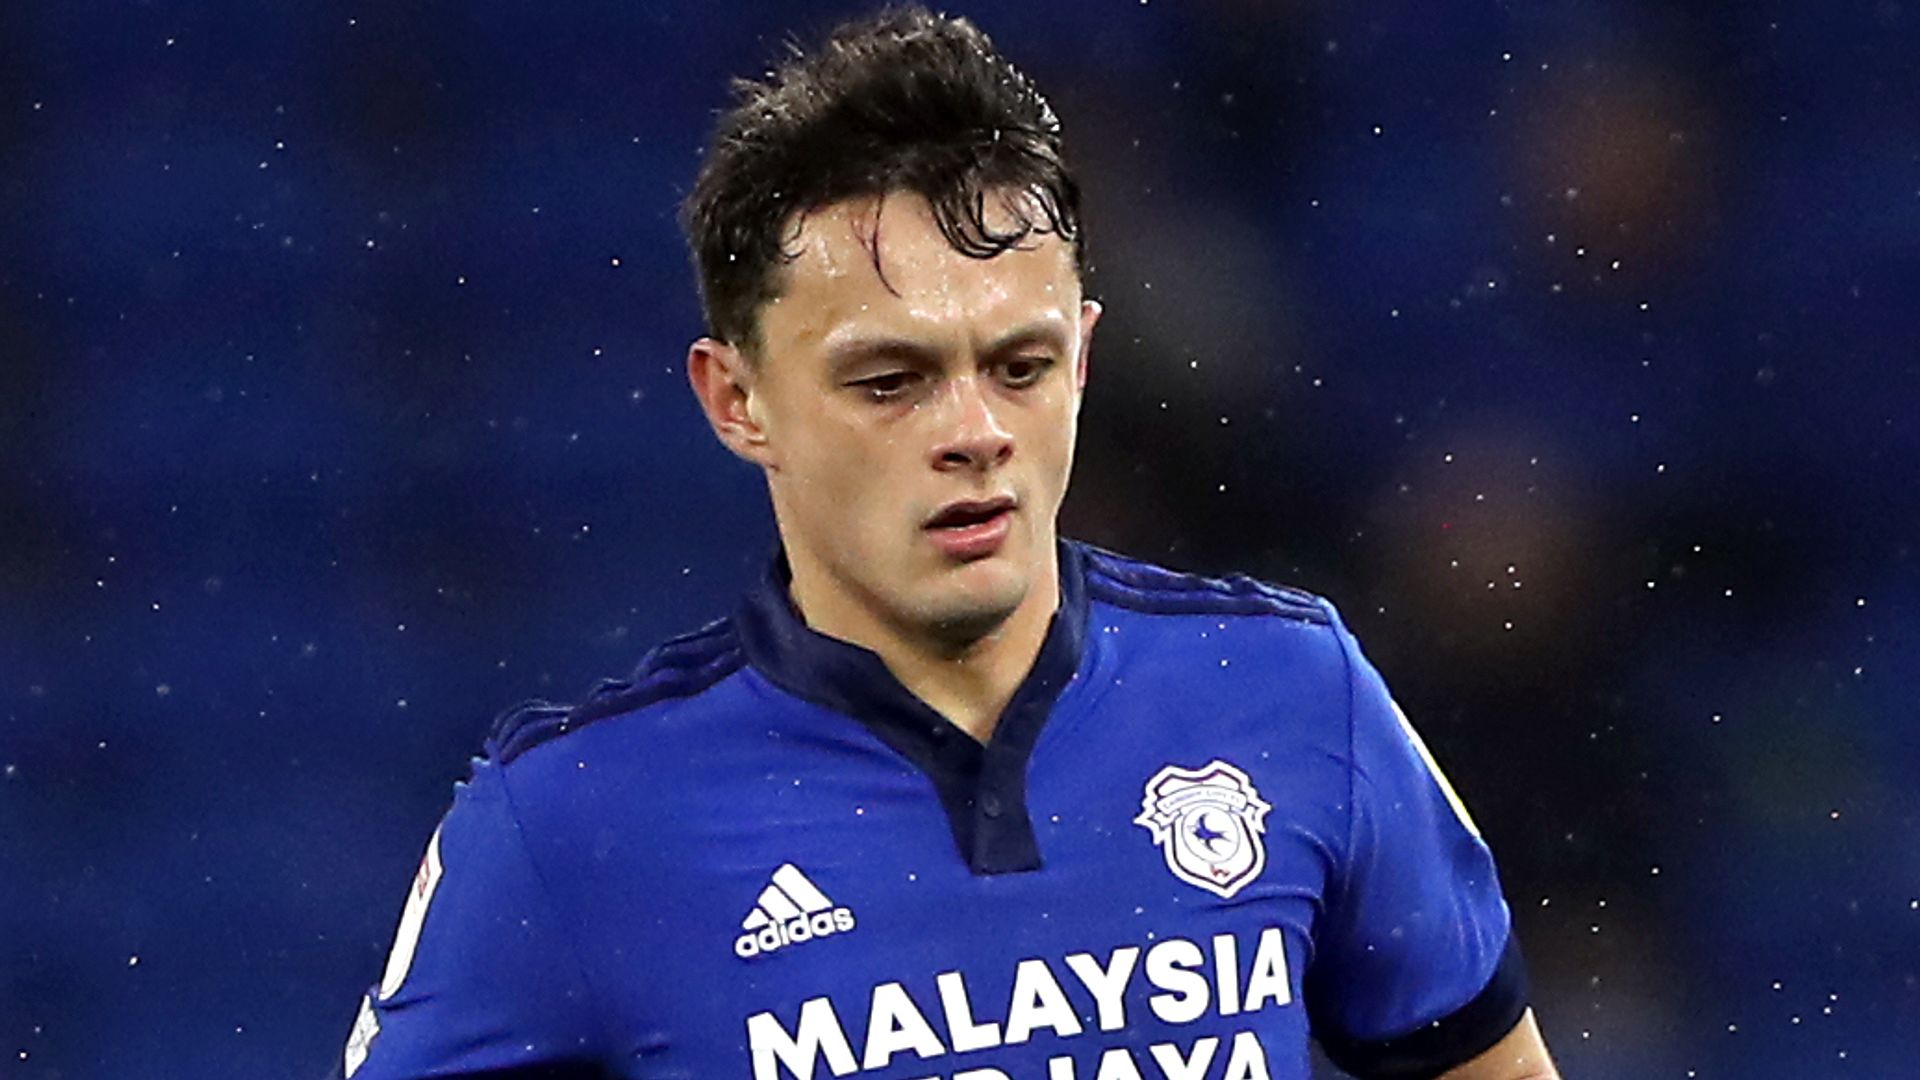 Cardiff hold off Boro fightback for victory